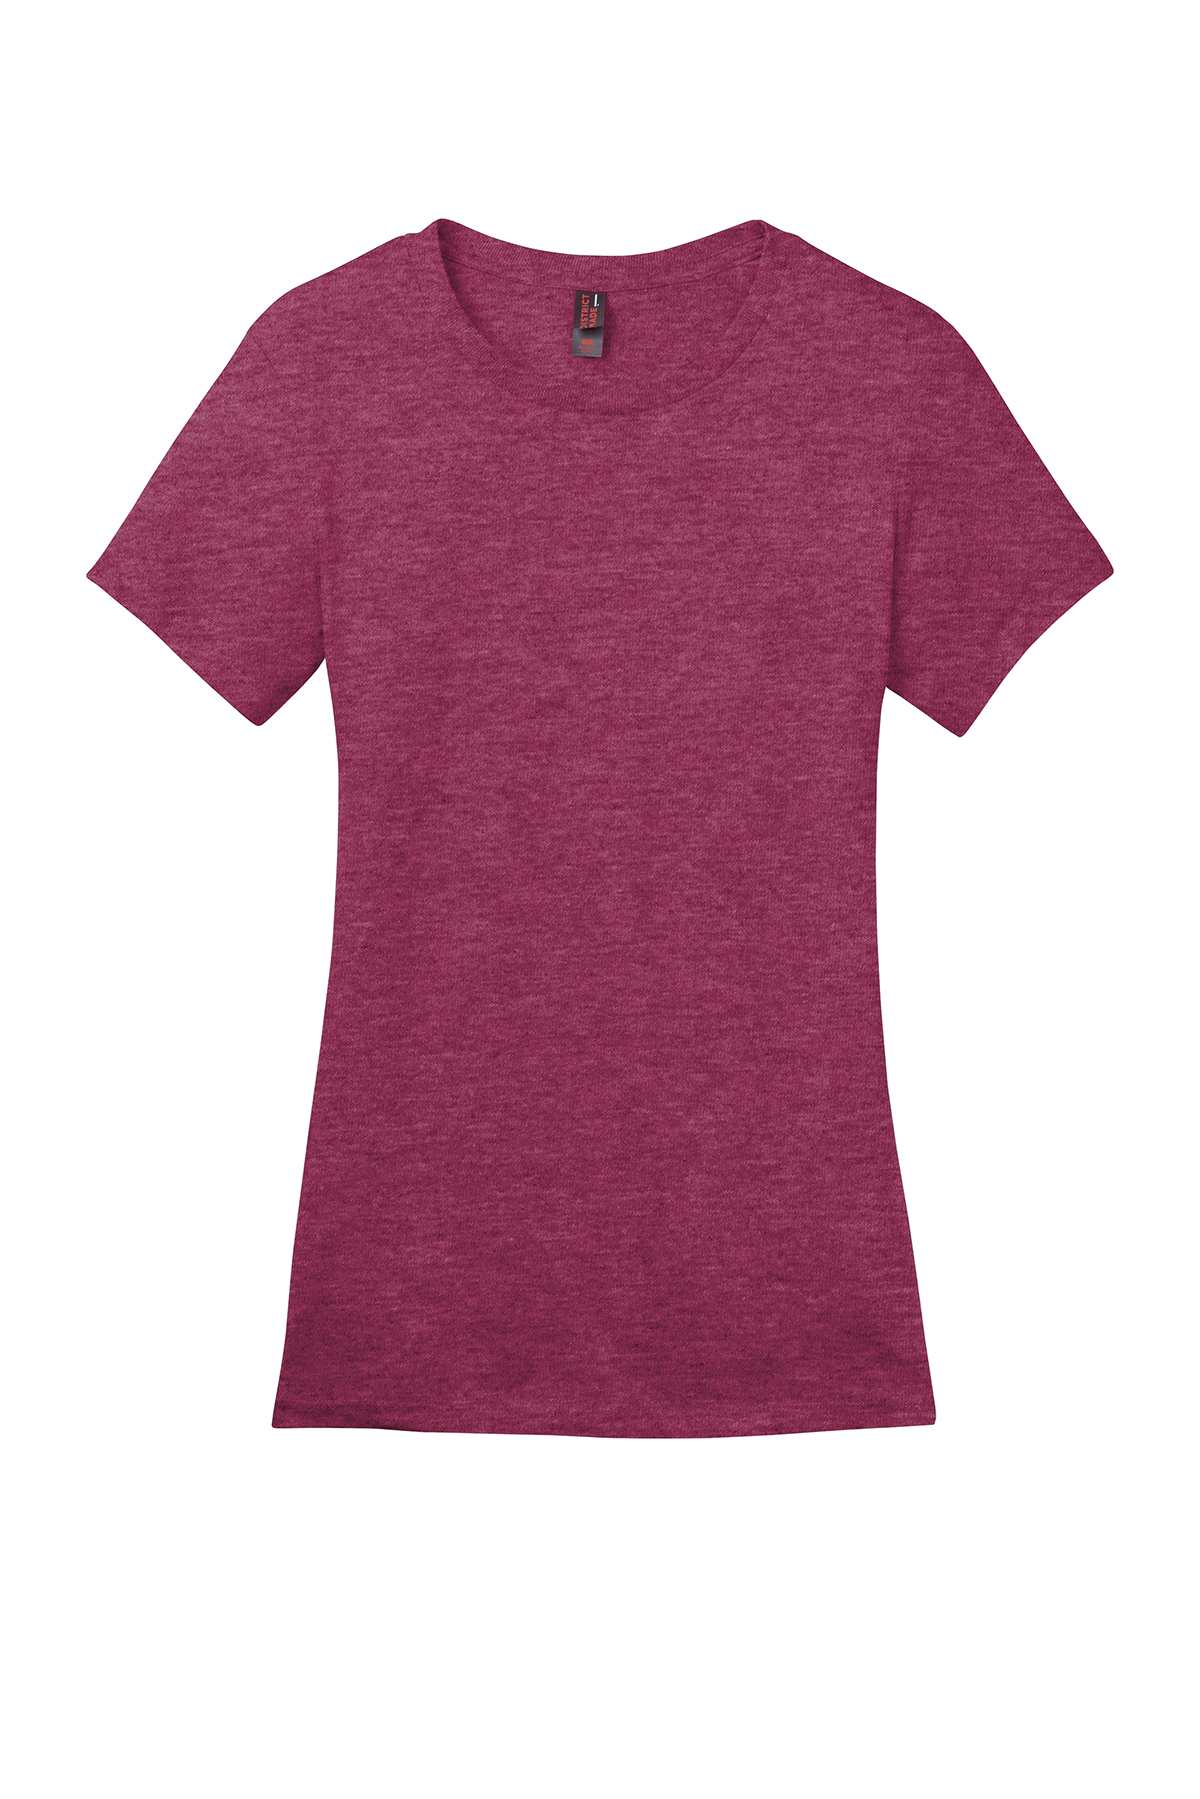 District Women’s Perfect Weight Tee | Product | SanMar